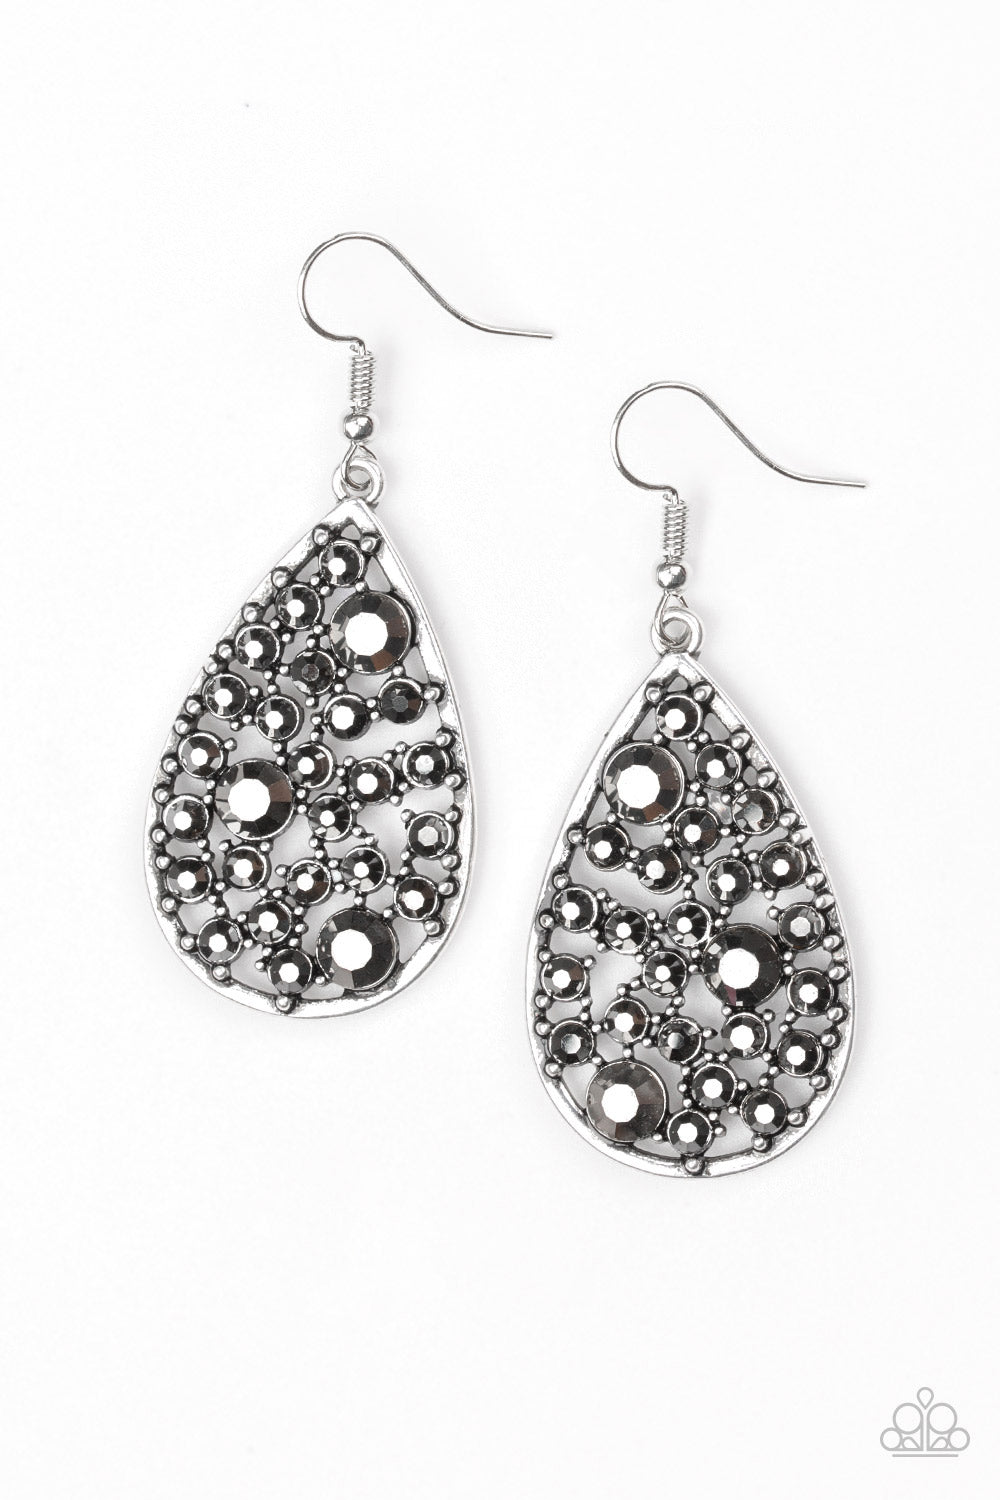 GLOW With The Flow - Silver earrings